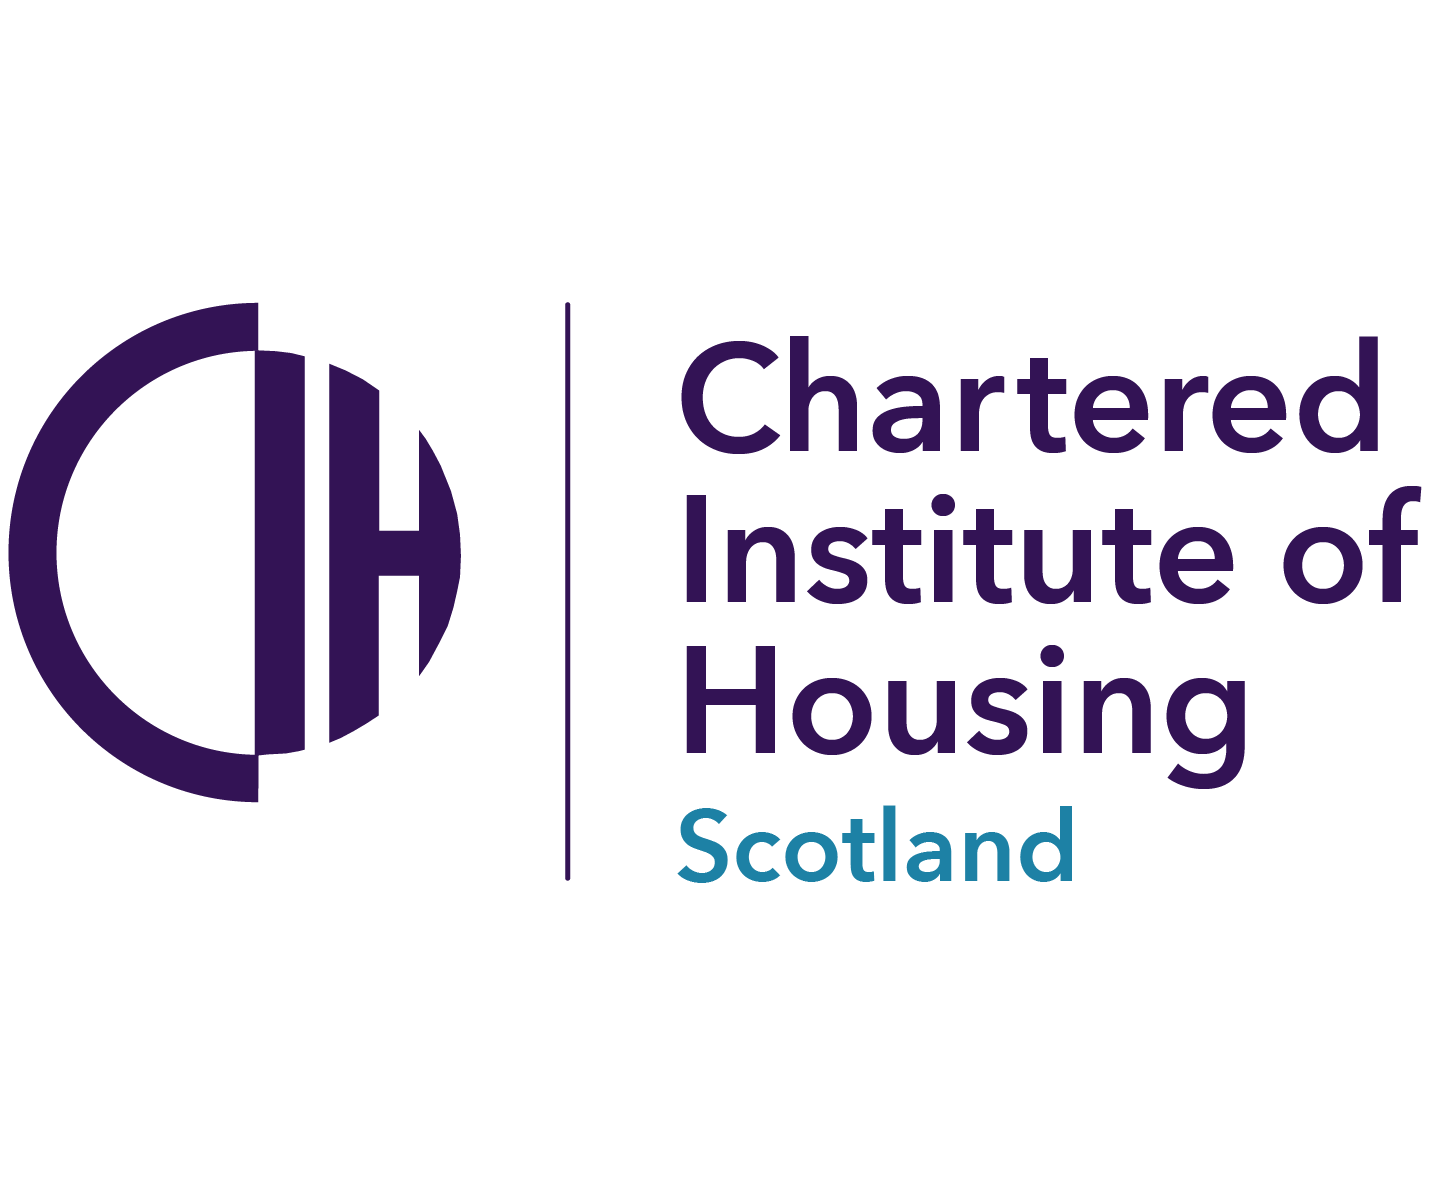 CIH Scotland calls for greater recognition of housing’s role in delivery of health and social care for older people